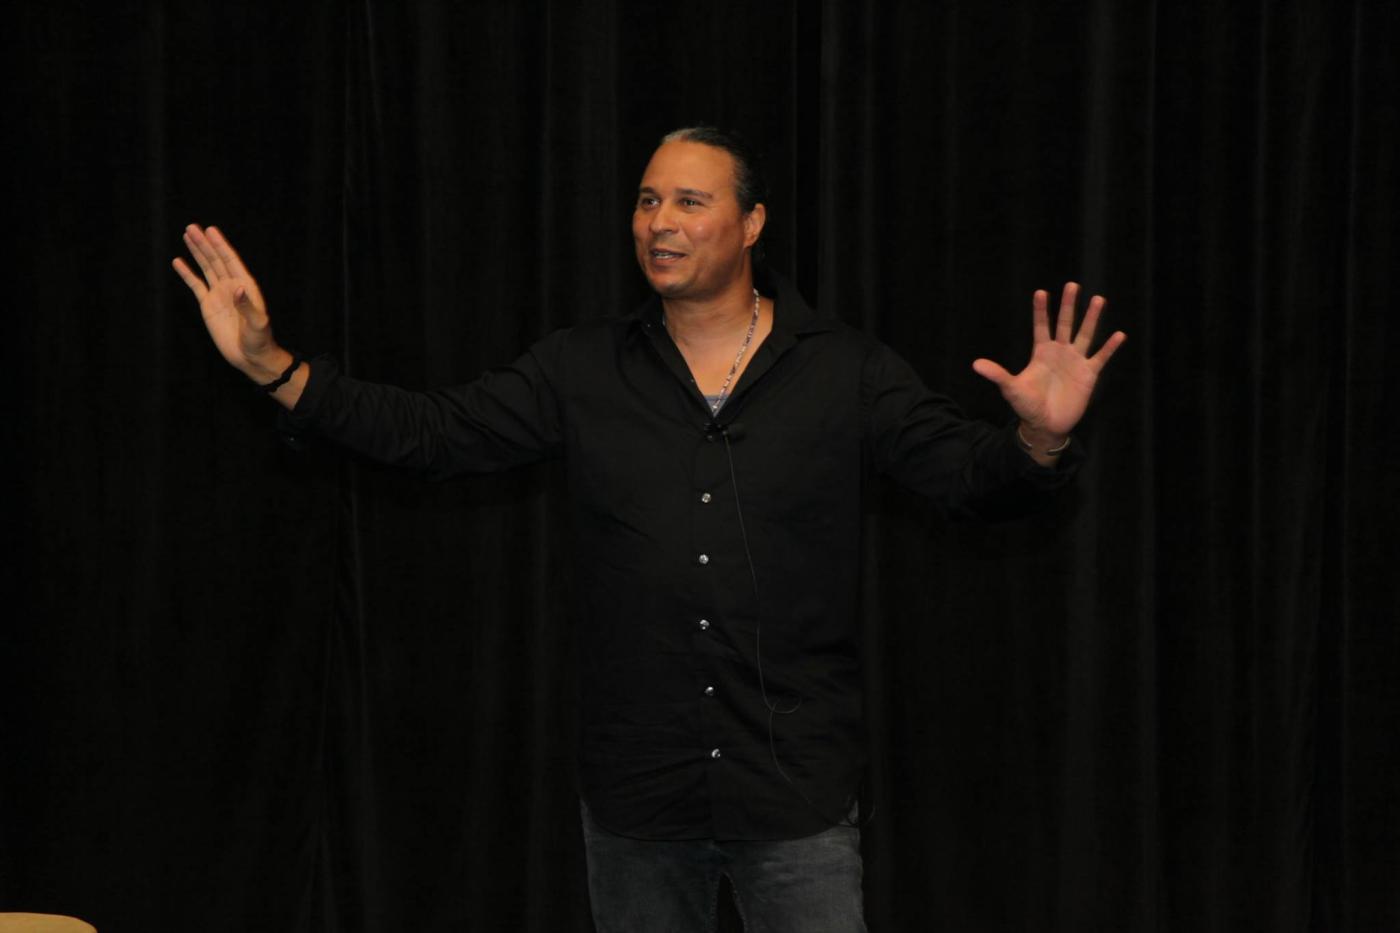 In a black shirt and in front of a black curtain, a man holds his hands up.